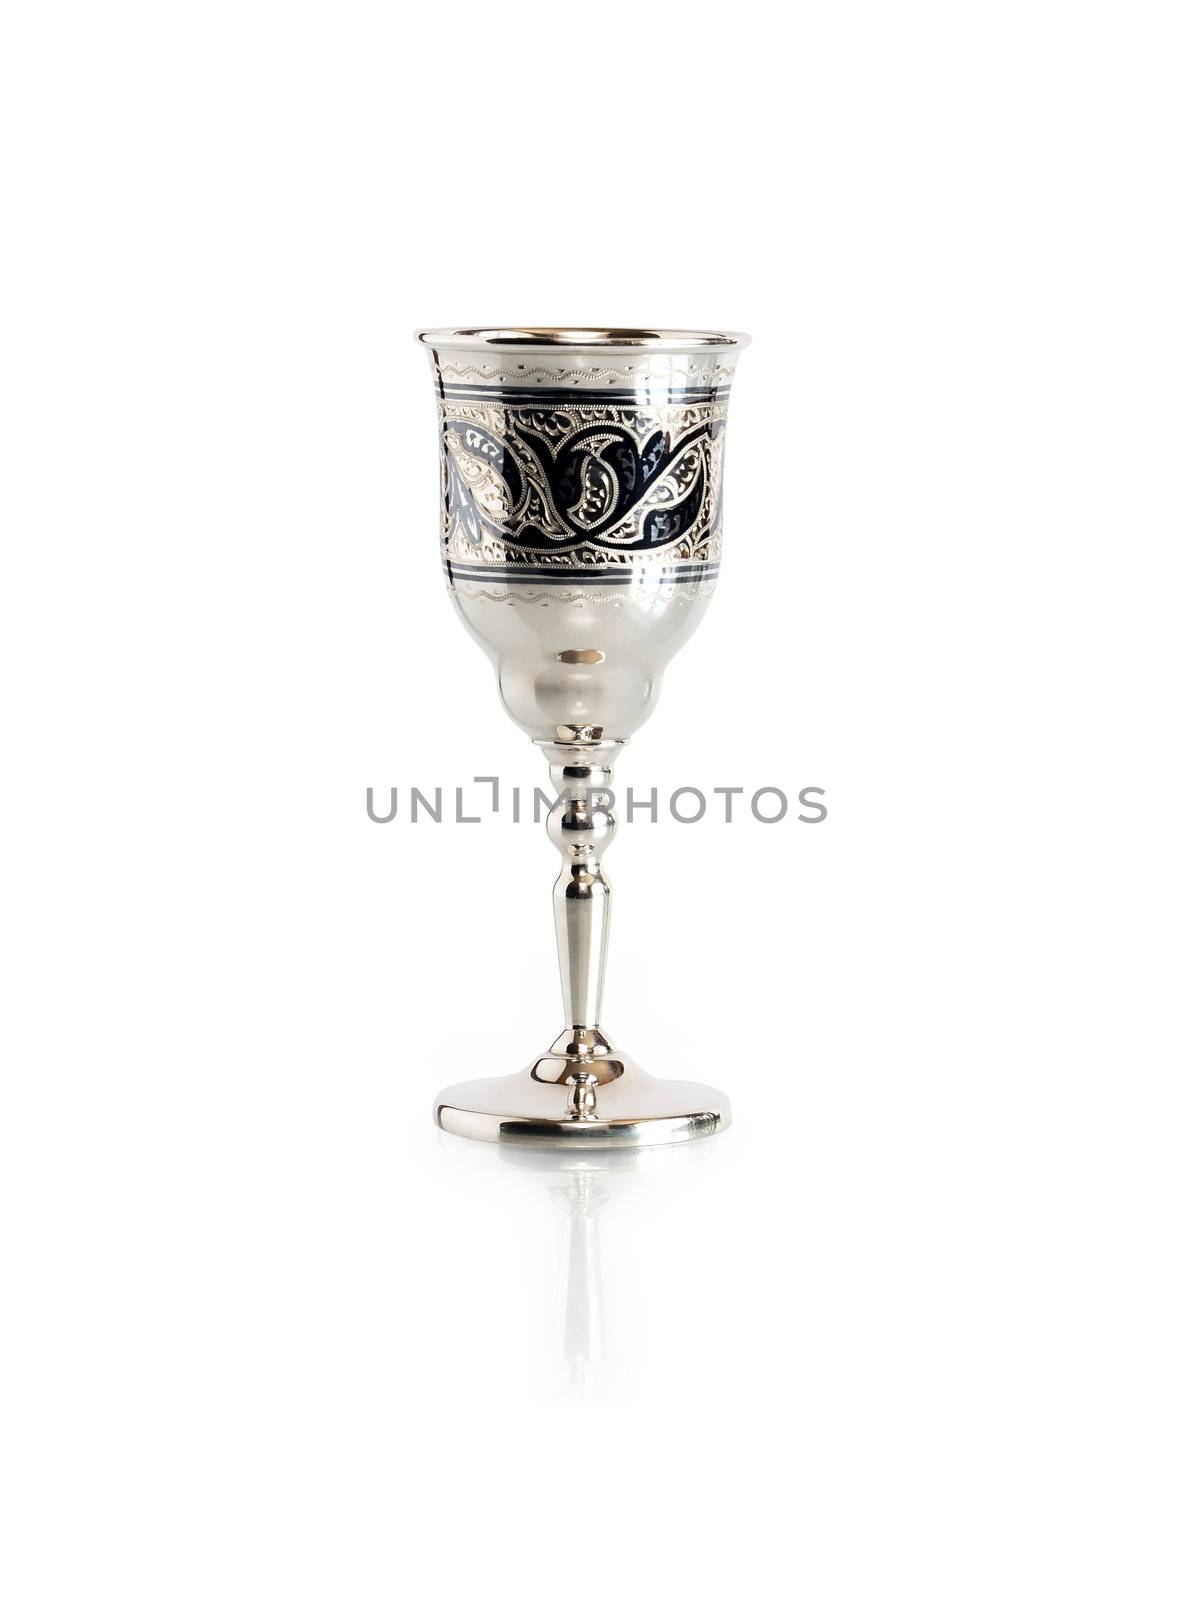 Nice vintage silver goblet on white background. Clipping path is included